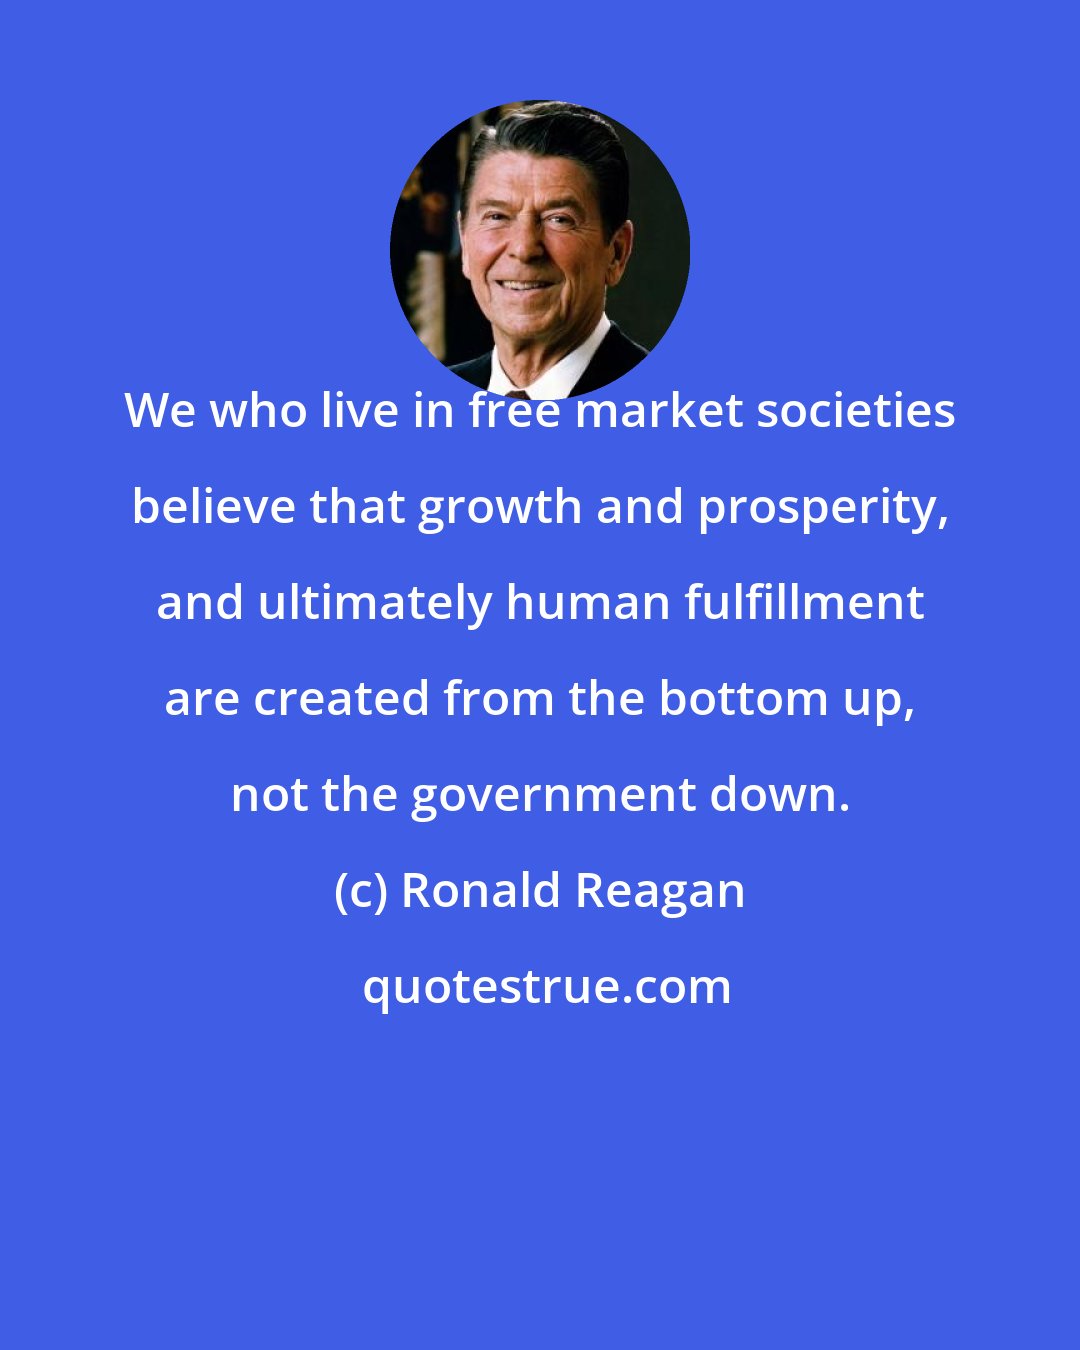 Ronald Reagan: We who live in free market societies believe that growth and prosperity, and ultimately human fulfillment are created from the bottom up, not the government down.